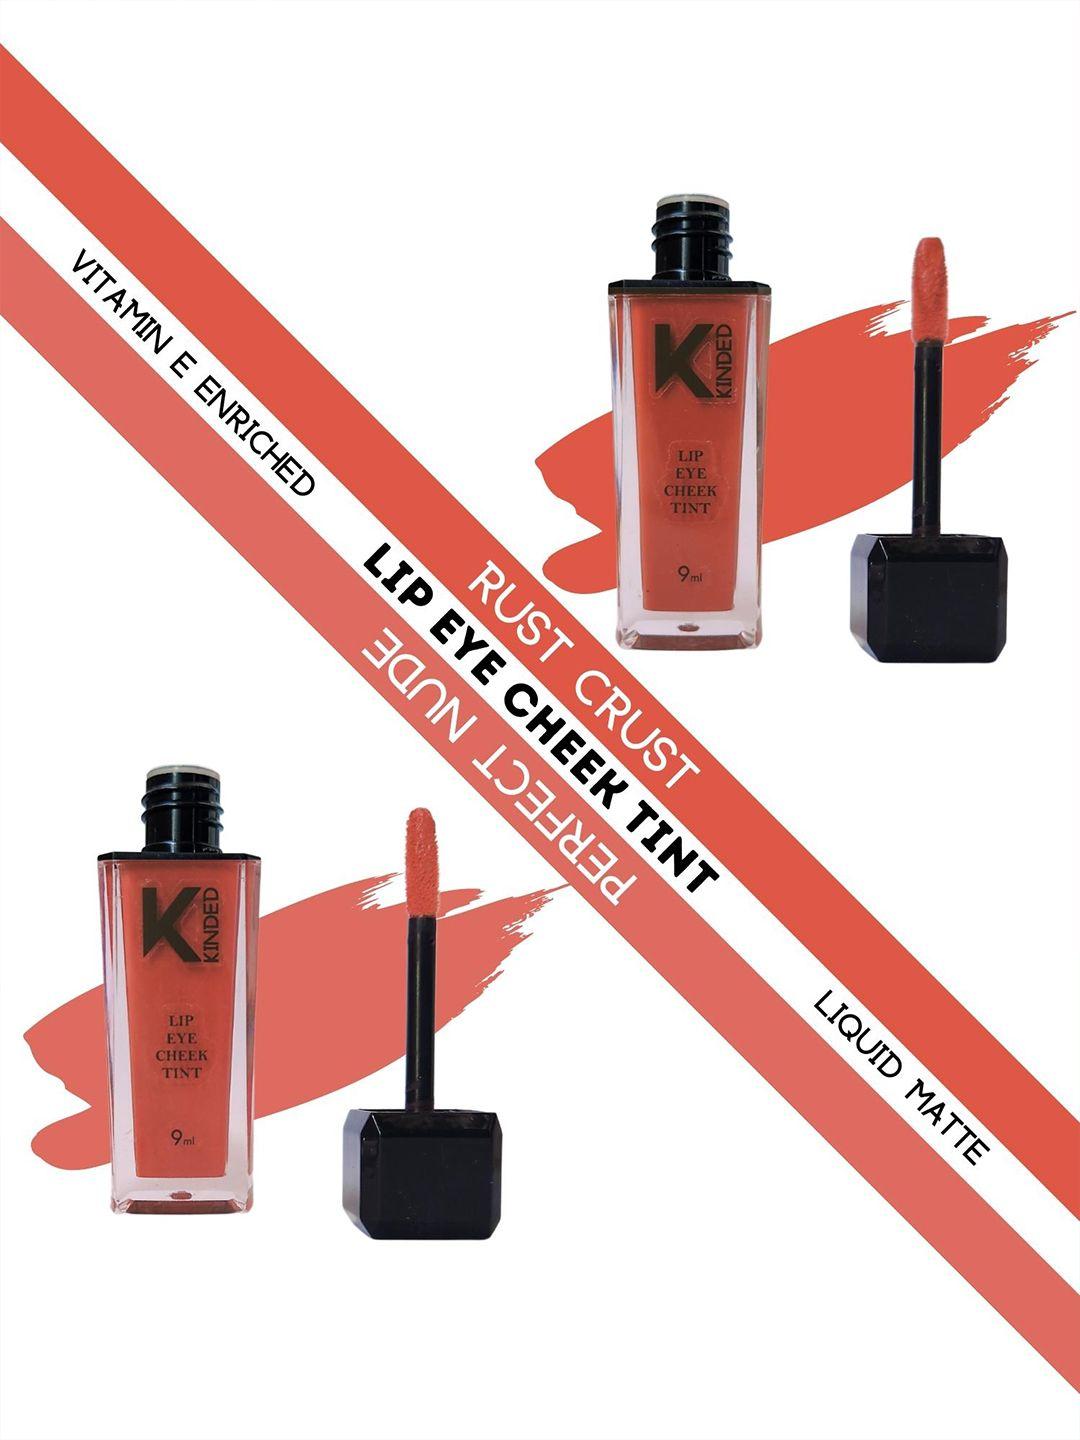 kinded set of 2 lip eye cheek tint with vitamin e - rust crust 05 & perfect nude 10